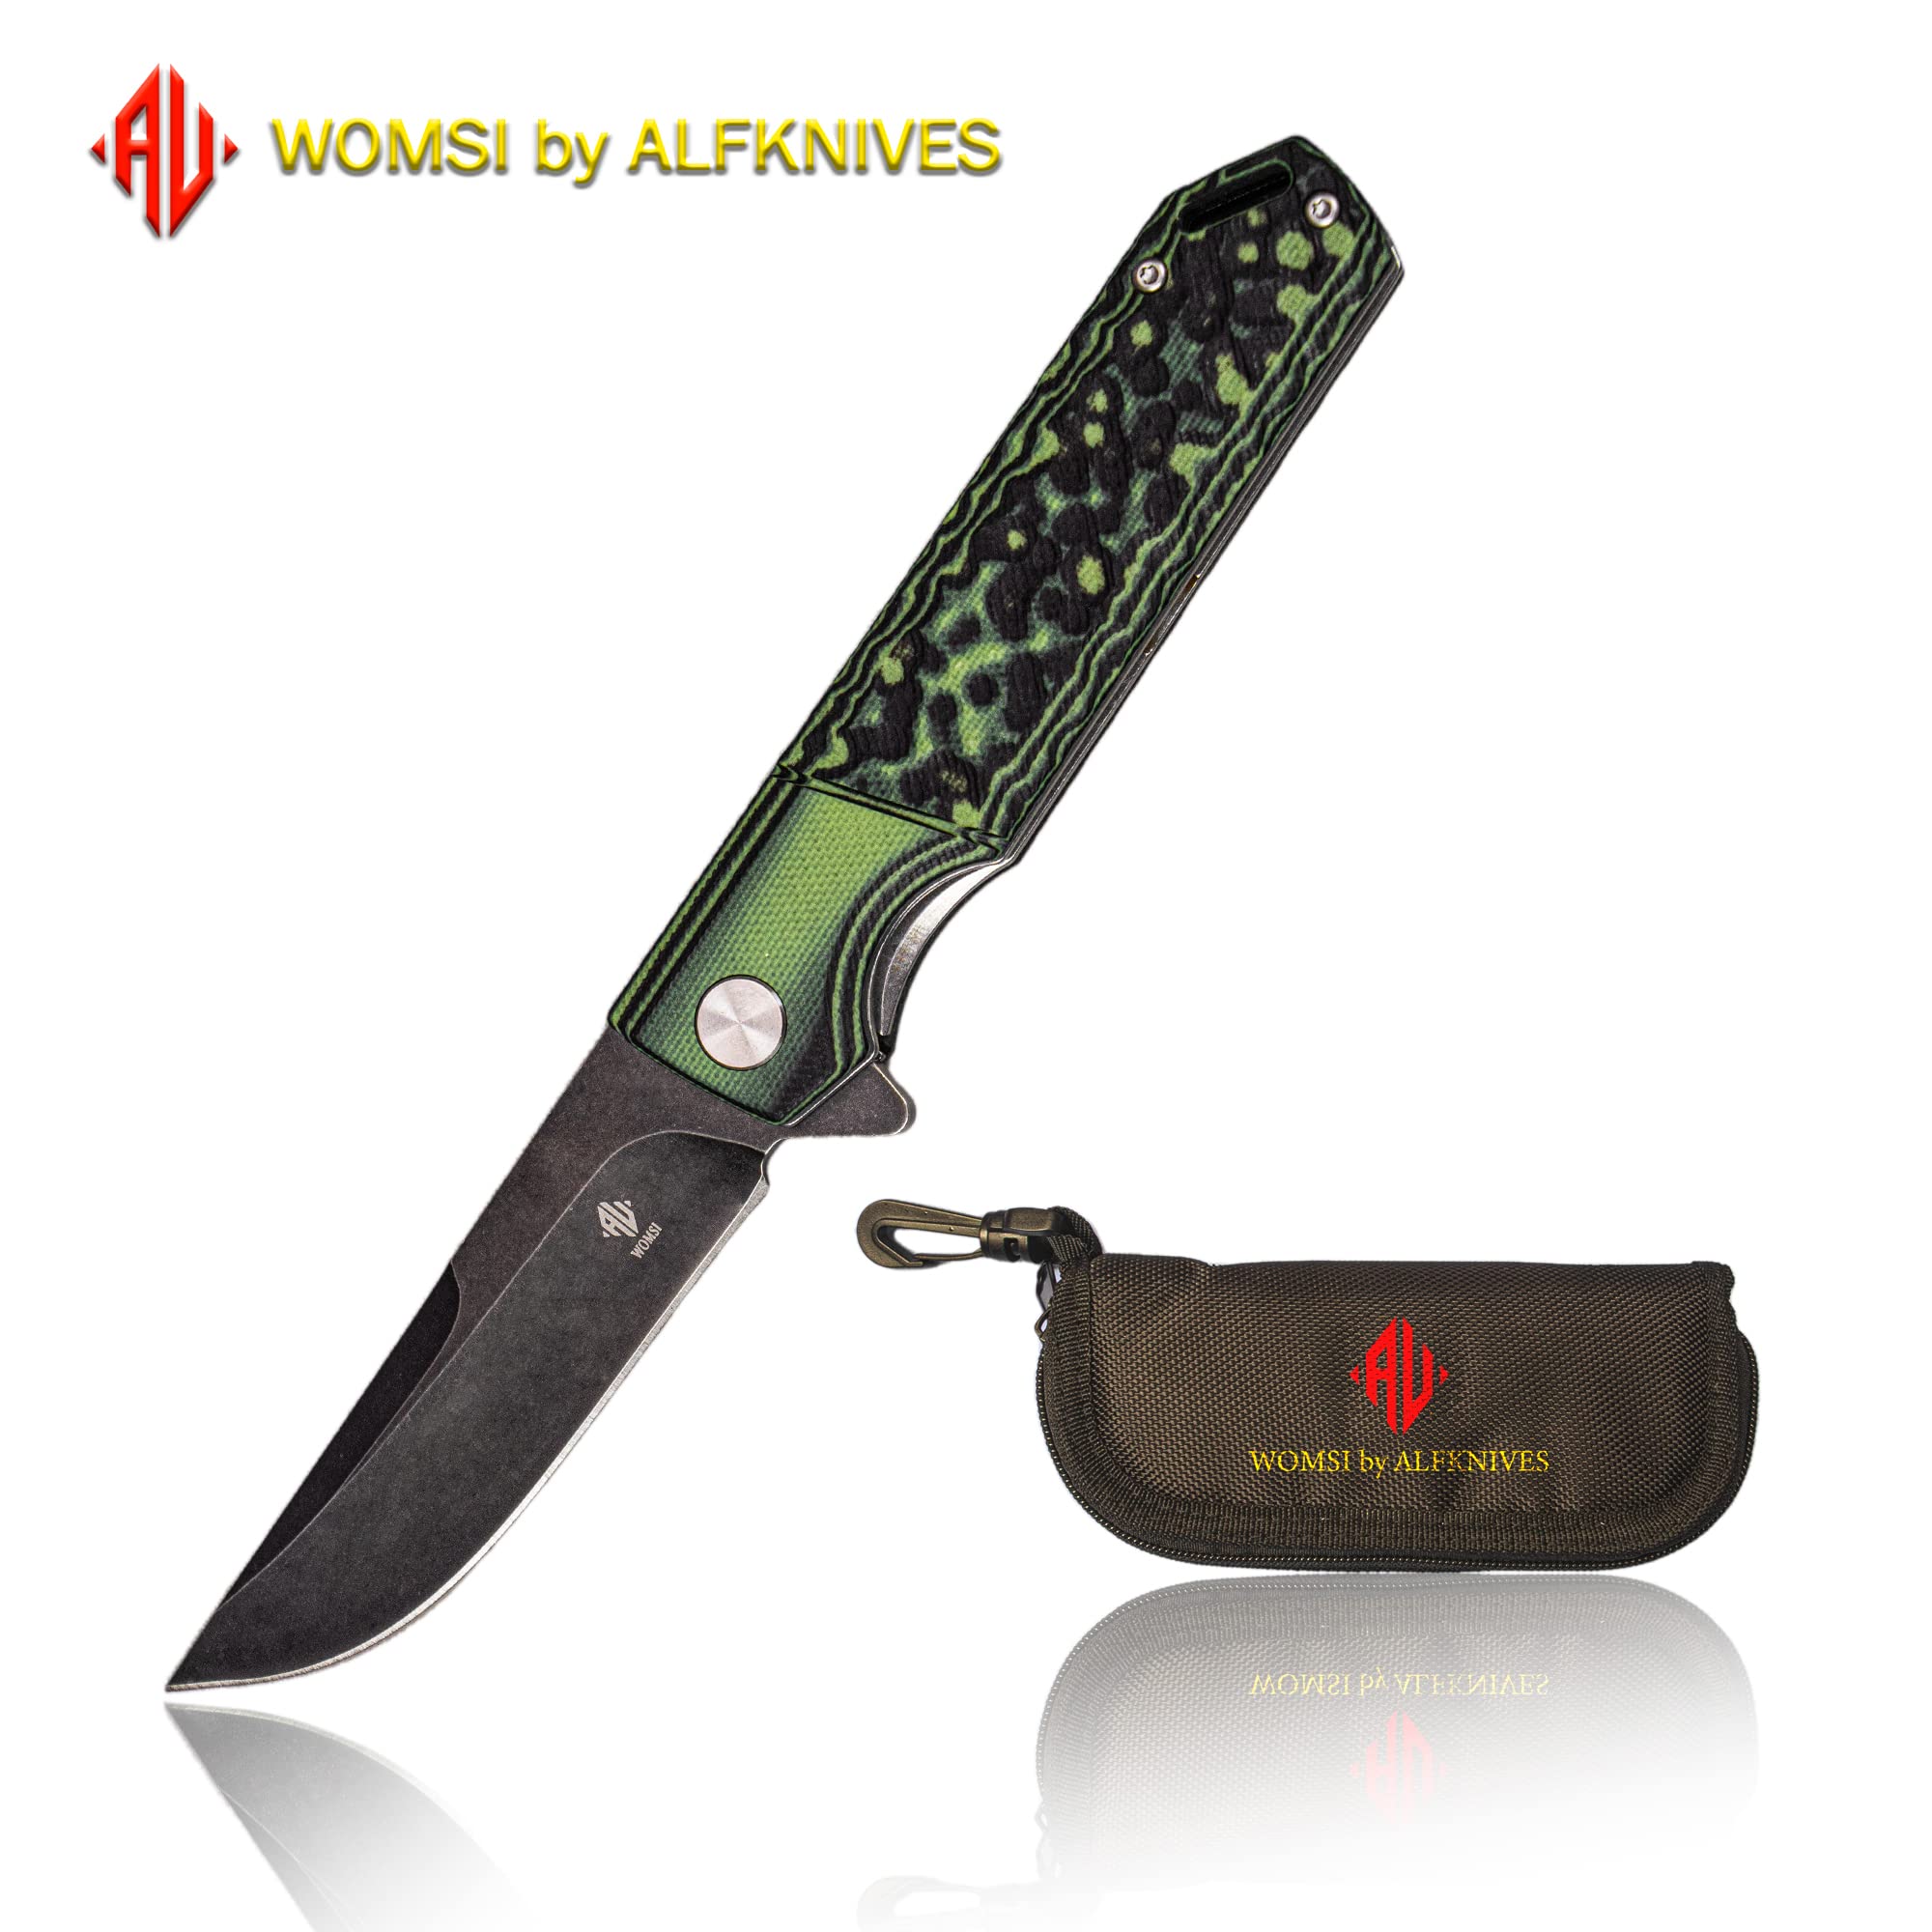 WOMSI Folding Knife,420 stainless steel clipped S90V/60HRC Blade,Sonorous&durable G10 Handle,Ceramic Bearing Inside,for Hunter Outdoor Bushcraft Fishing Hiking,with Gift Box